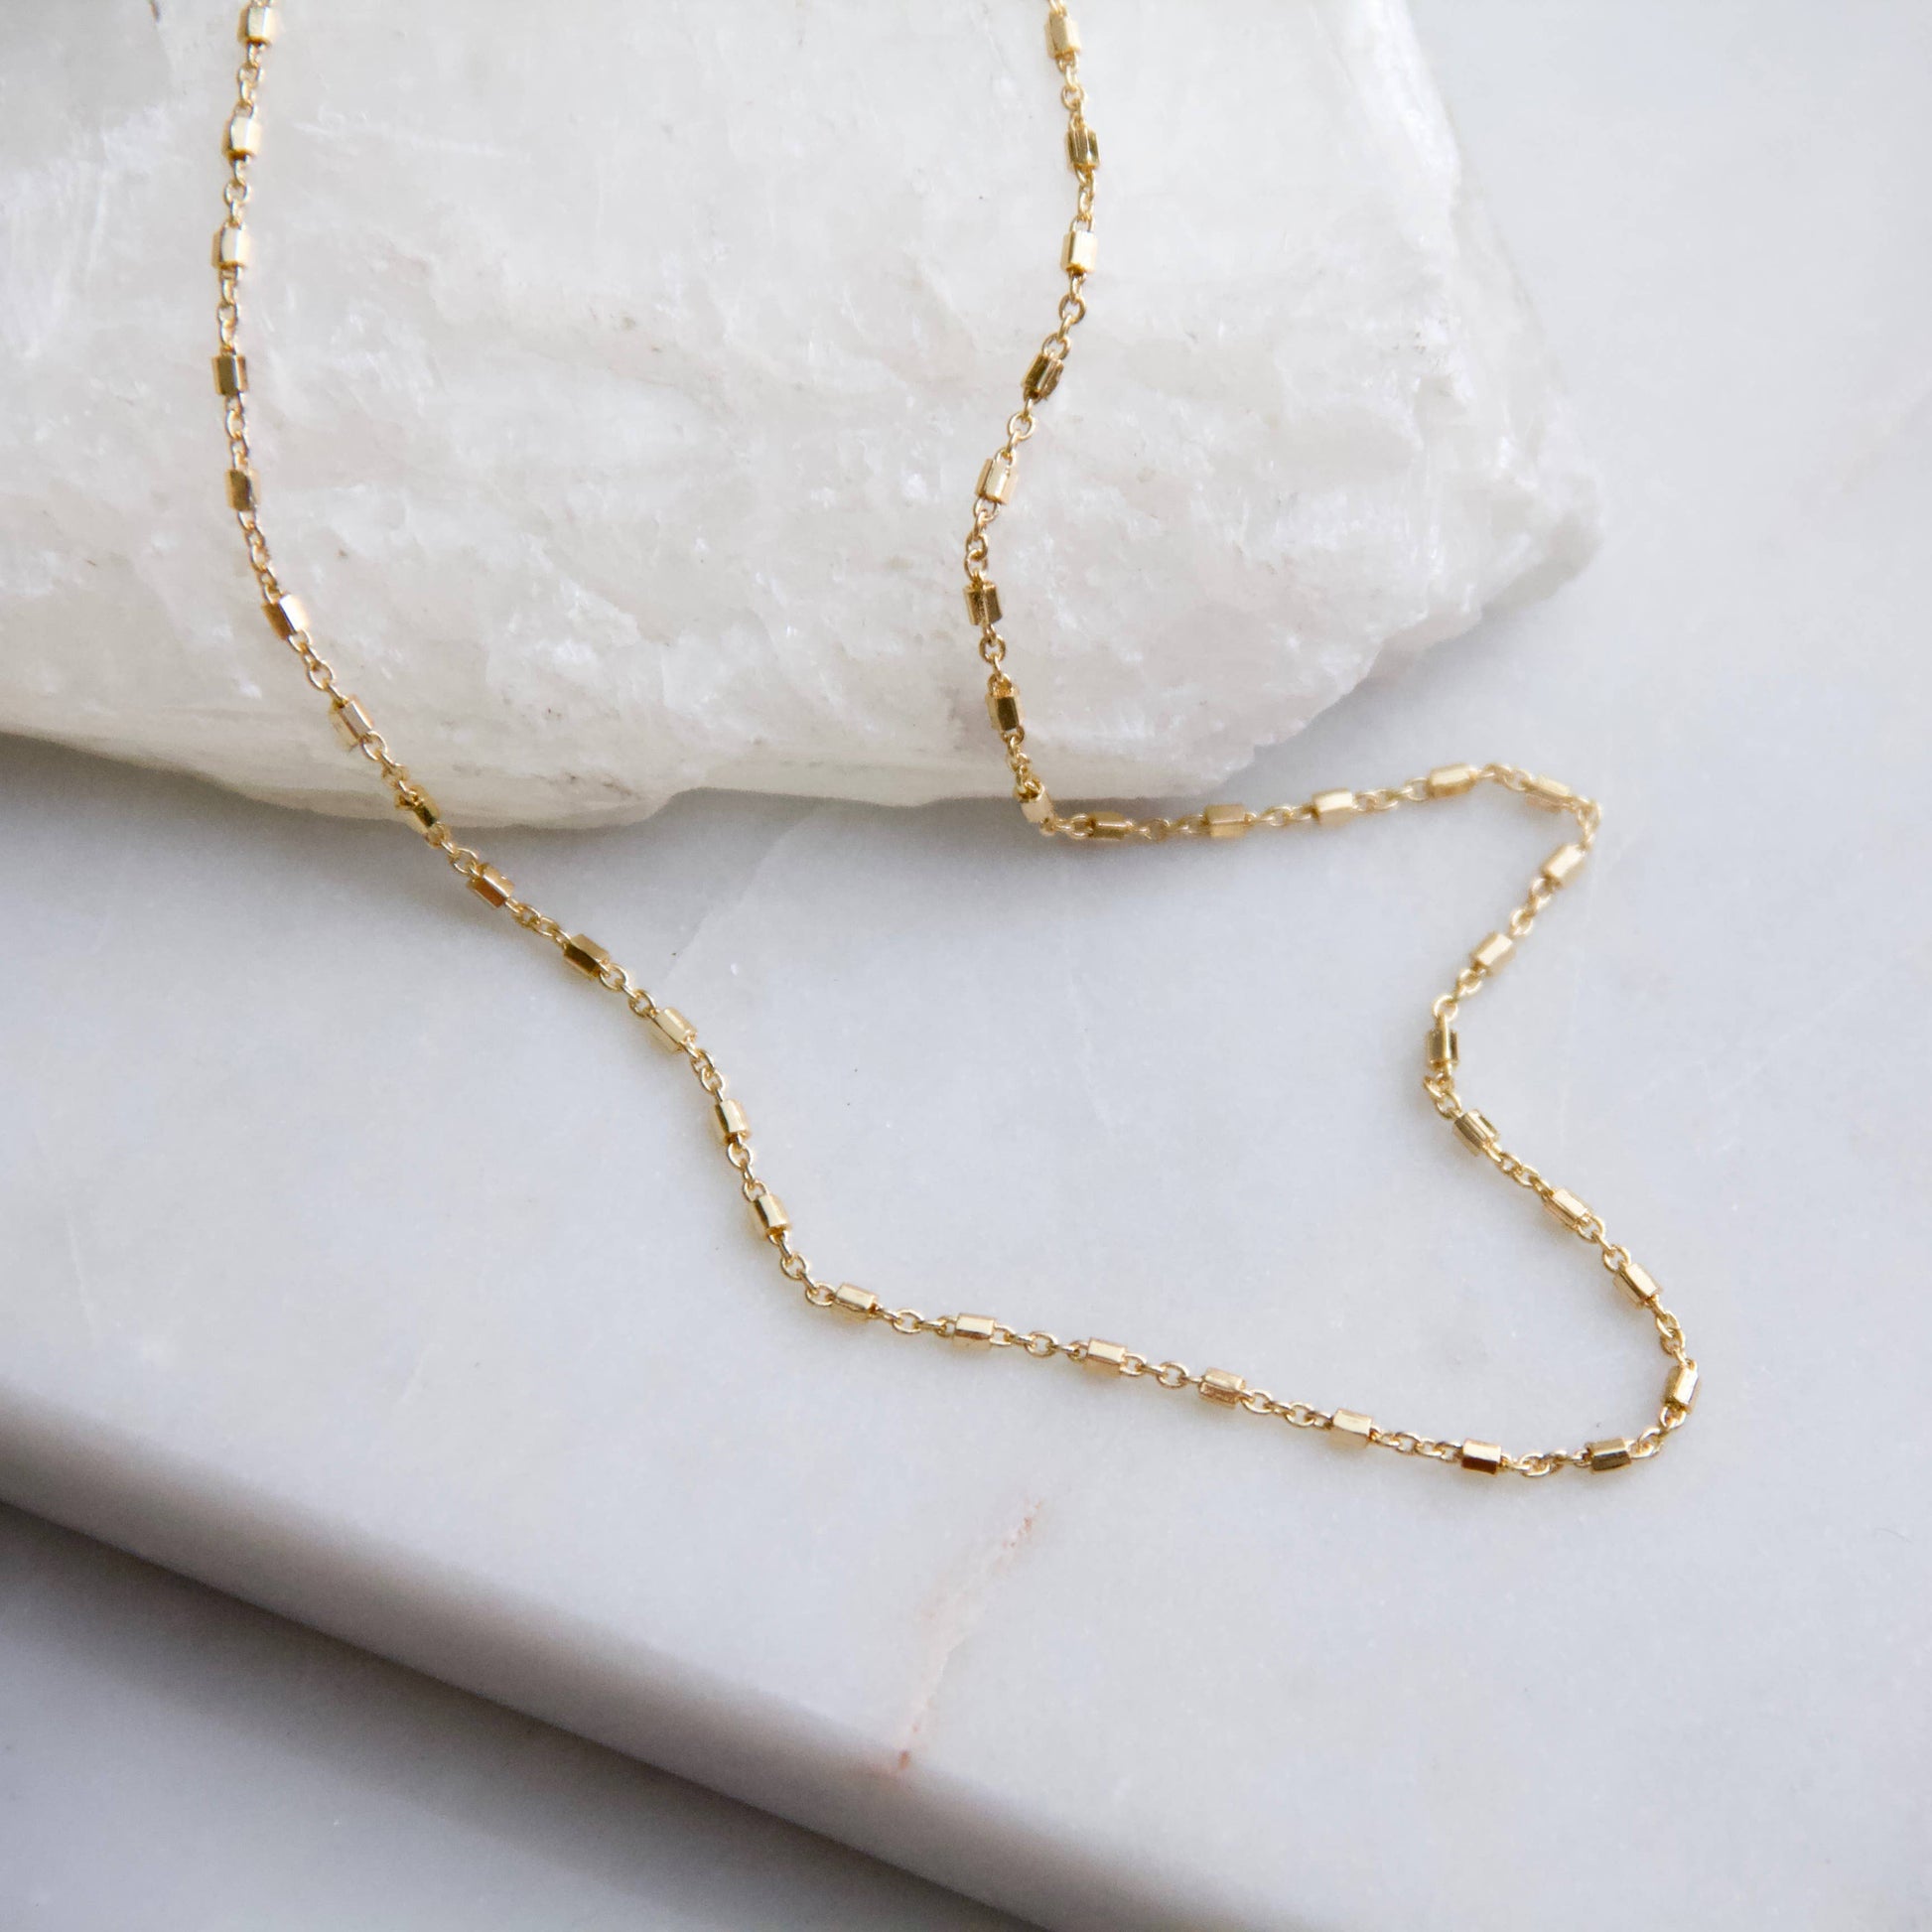 Just A Chain Necklace - Storm and Sky Shoppe